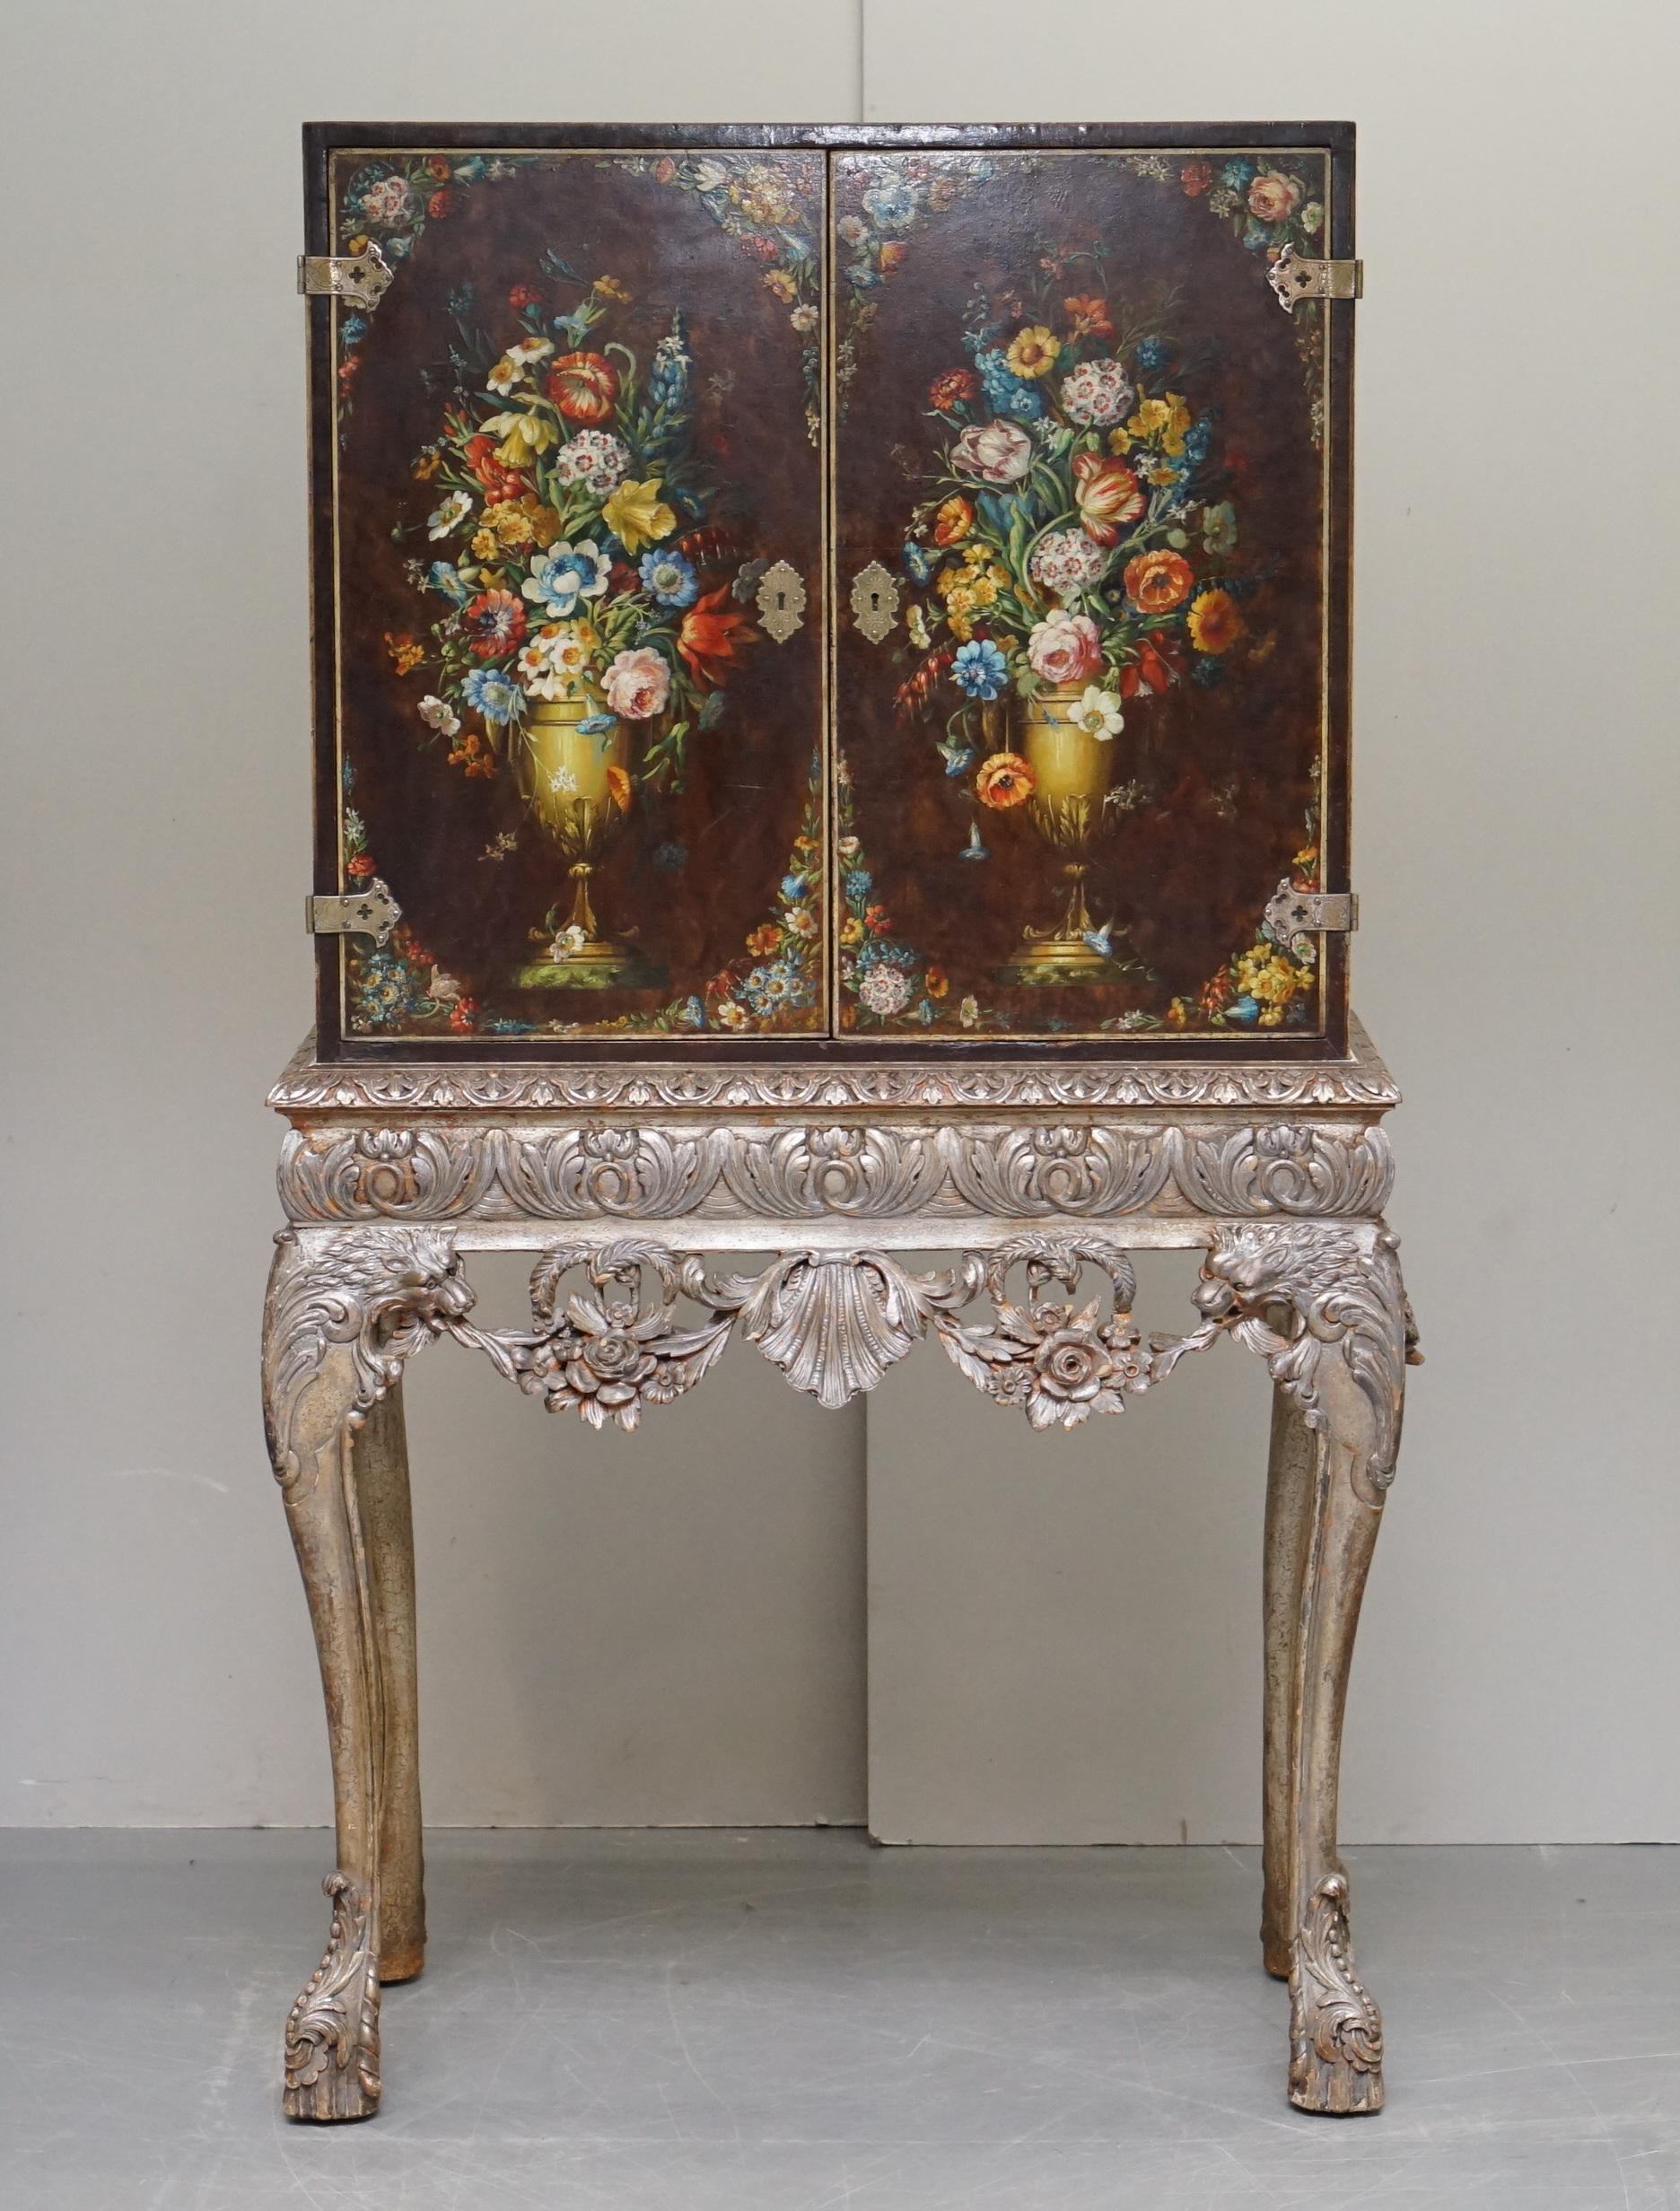 We are delighted to offer for sale this sublime circa 1840 Italian Venetian Polychrome painted cabinet on stand with Lion head carved silver leaf painted base

An exquisite looking and very well made piece, the base is ornately carved from top to